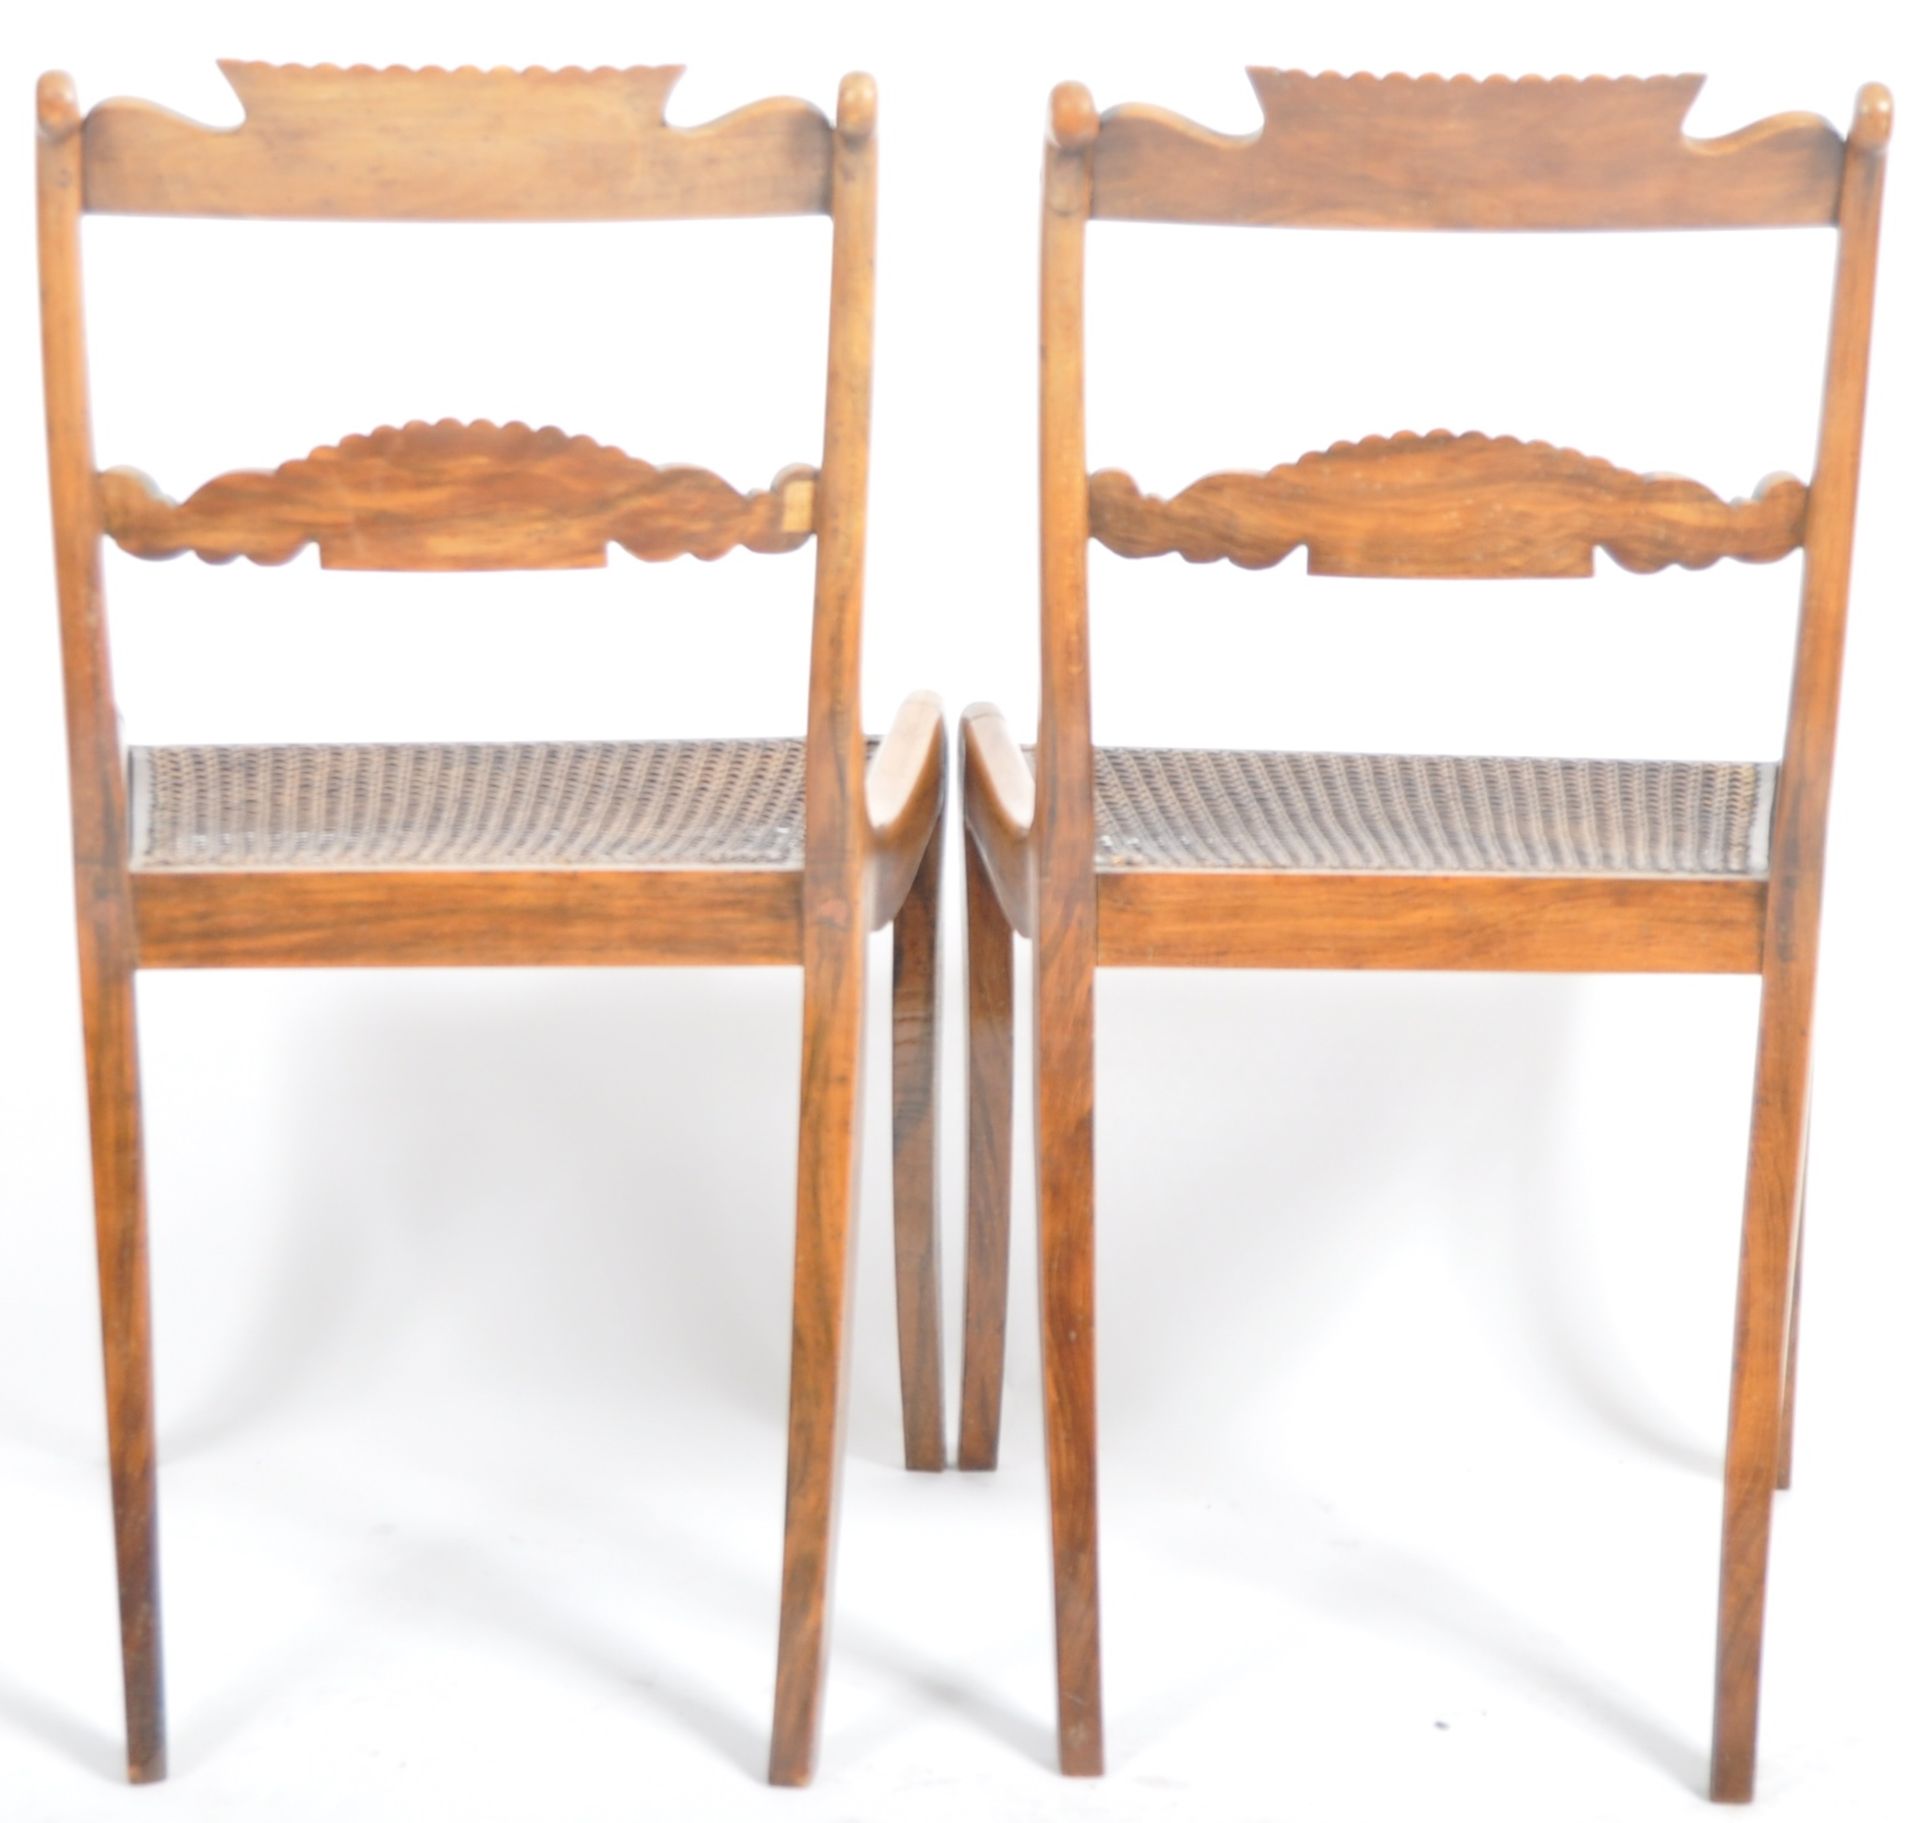 FOUR 19TH CENTURY REGENCY ROSEWOOD DINING CHAIRS - Image 4 of 8